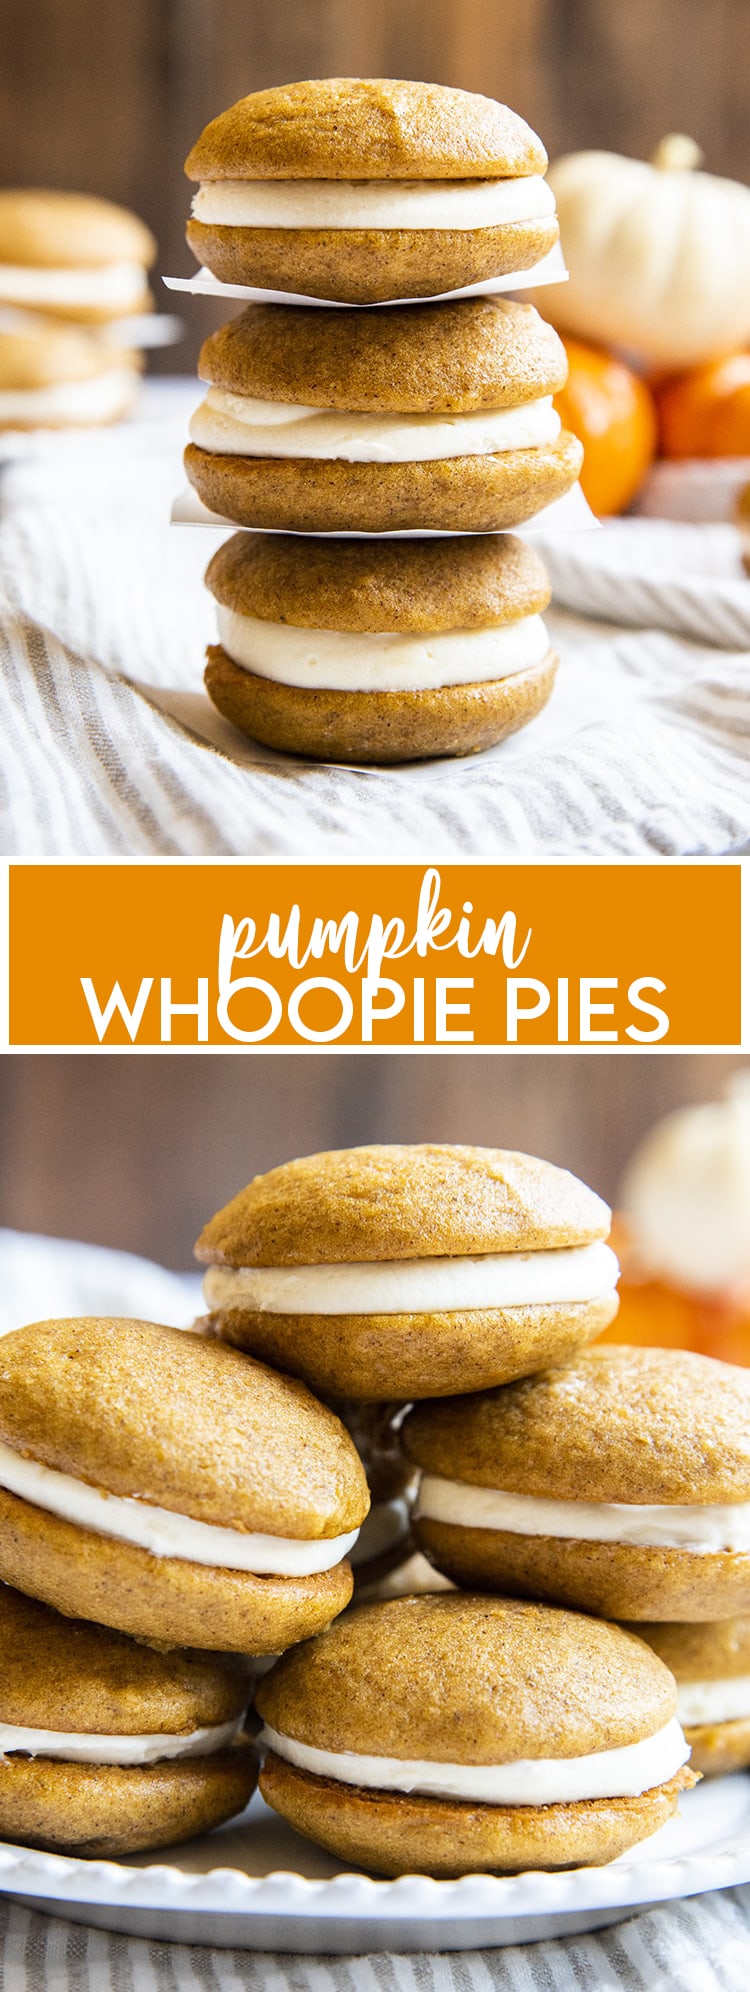 A stack of pumpkin whoopie pies with a text overlay for pinterest. Then a pile of pumpkin whoopie pies on a white plate.